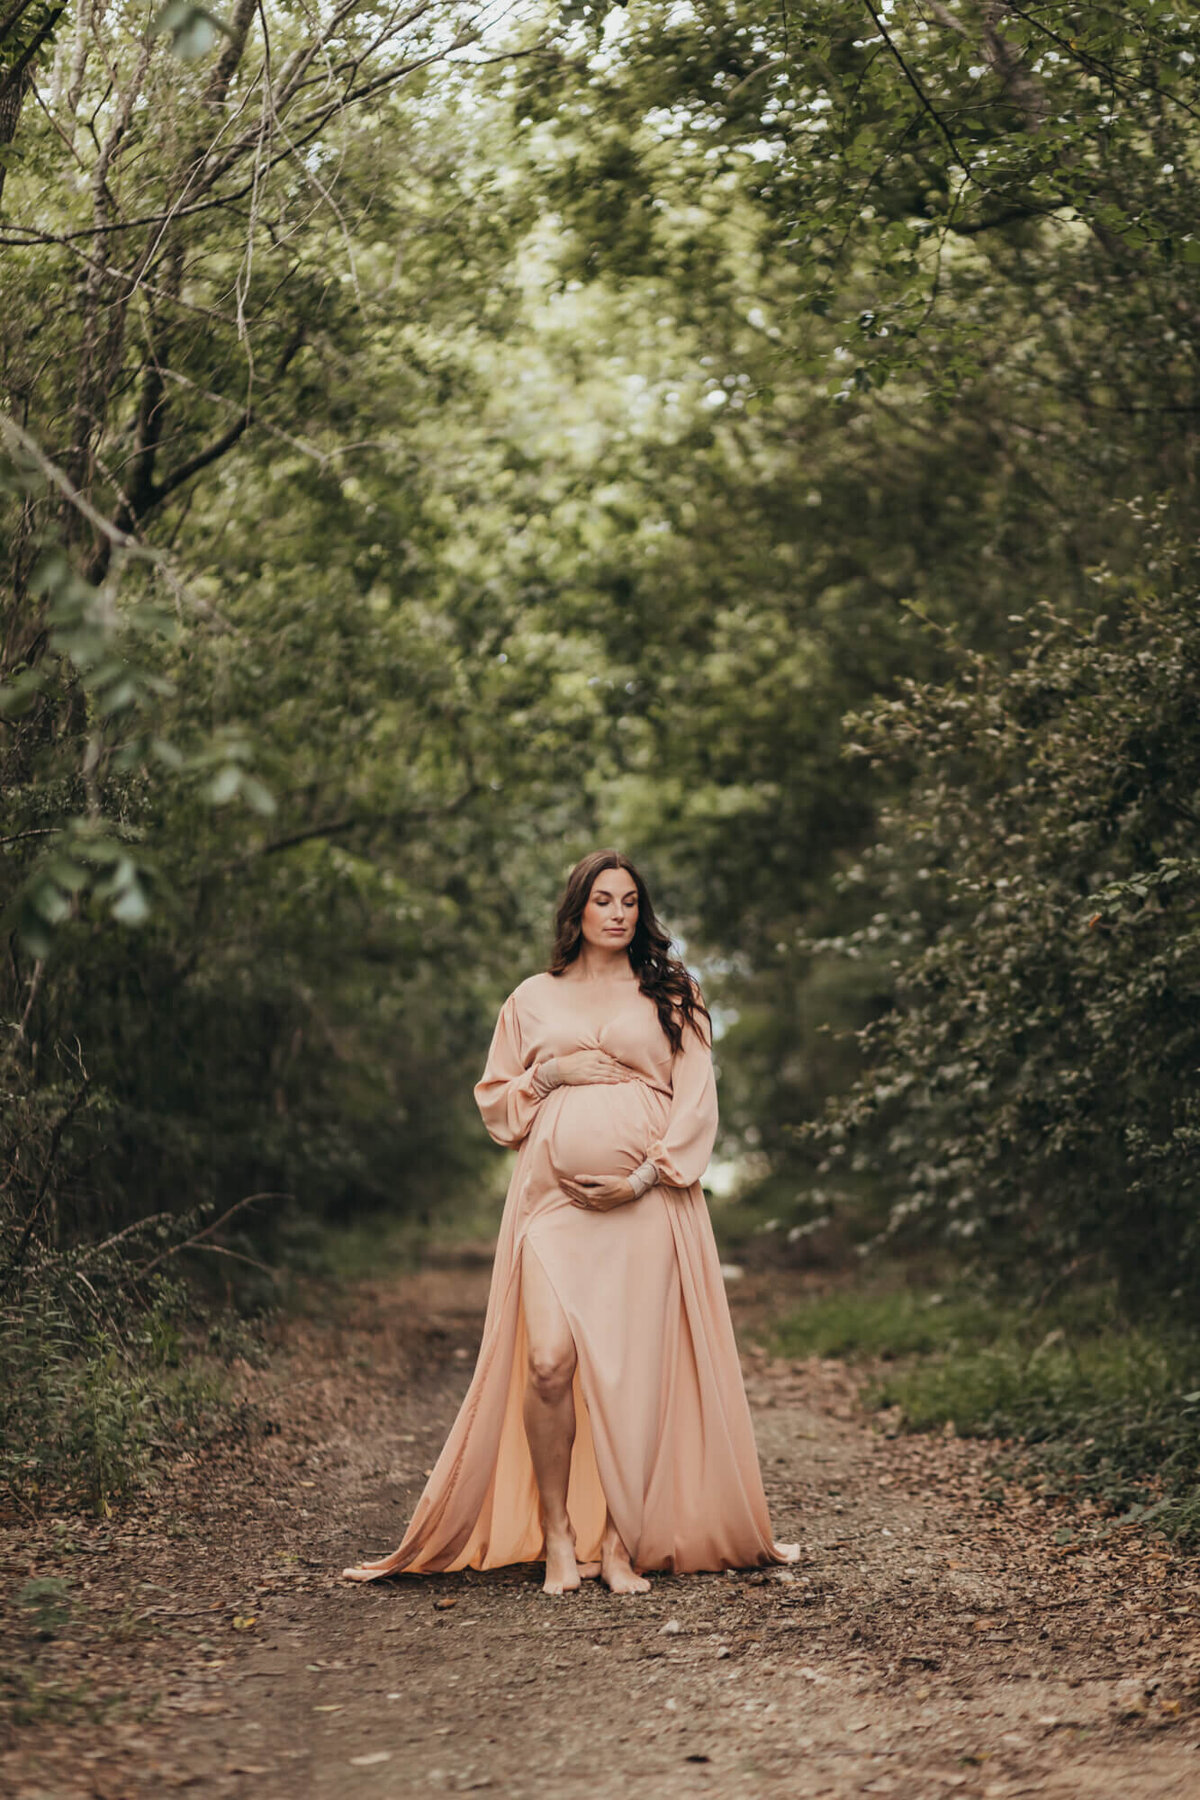 mom's dress blows in the wind for her maternity session, wearing a coral maternity gown.